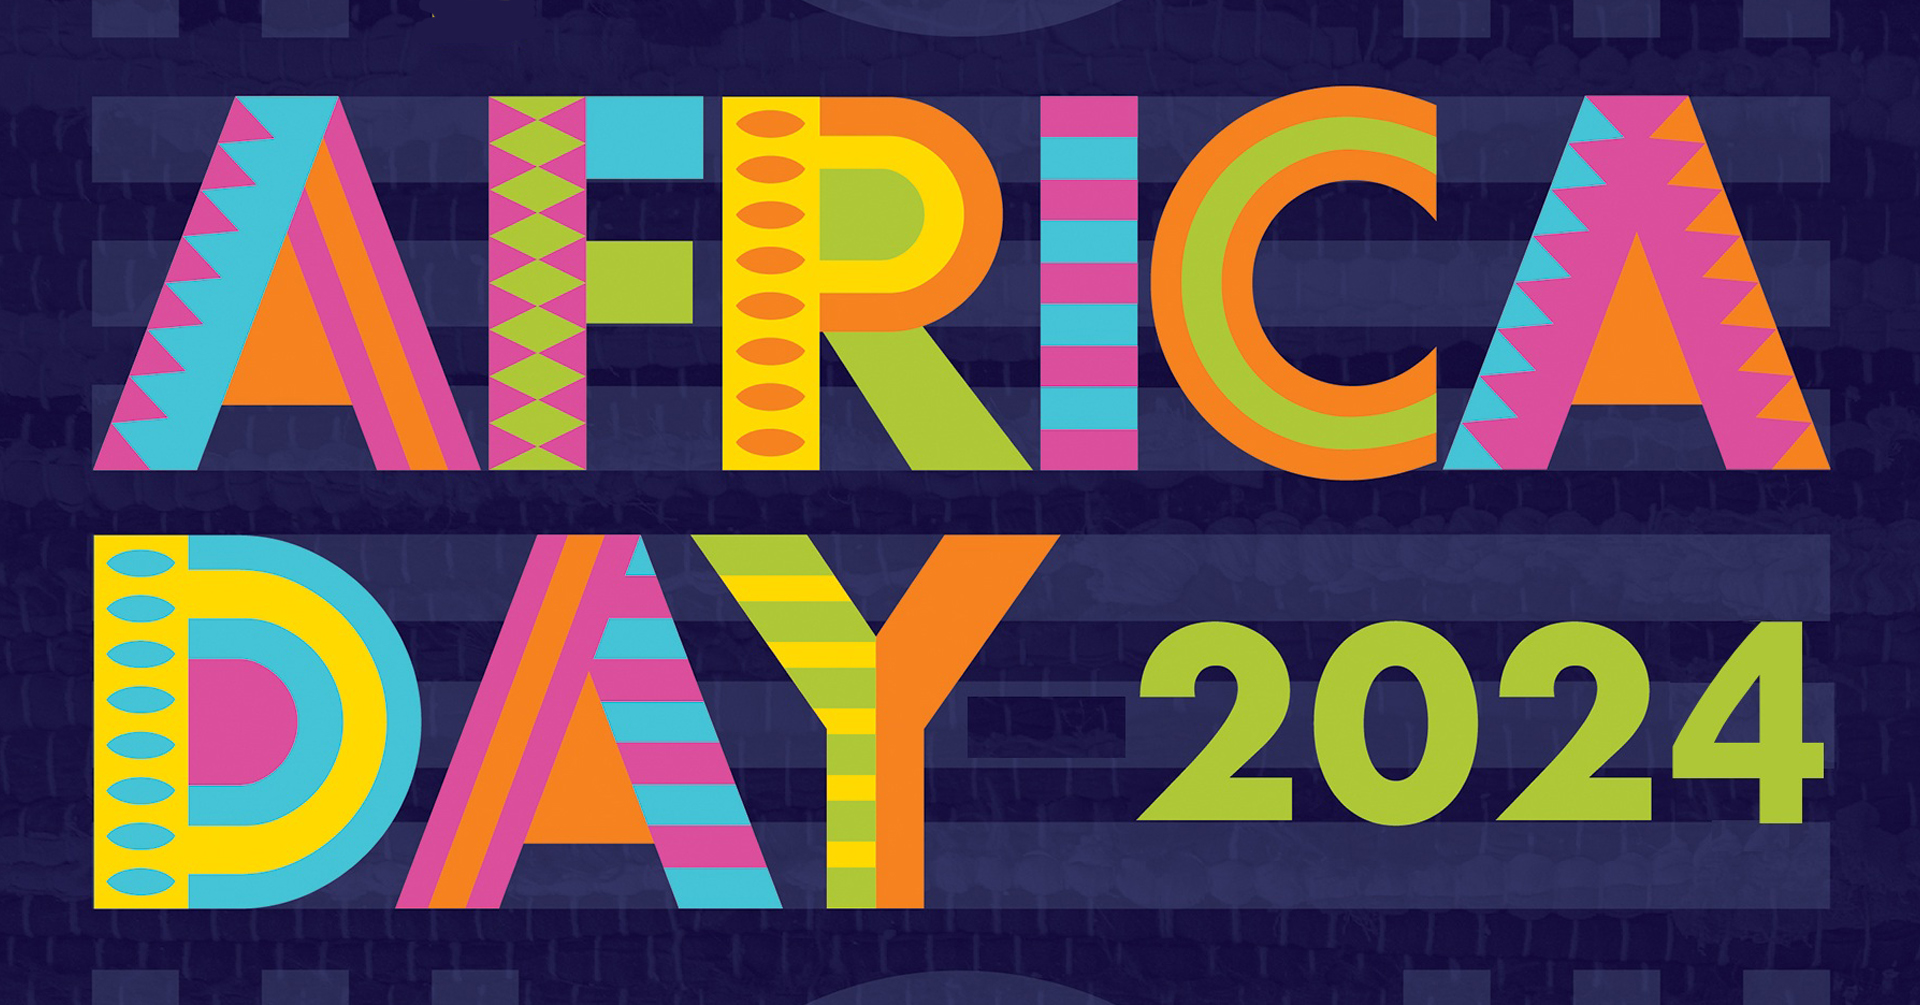 Africa Day)Image Draft